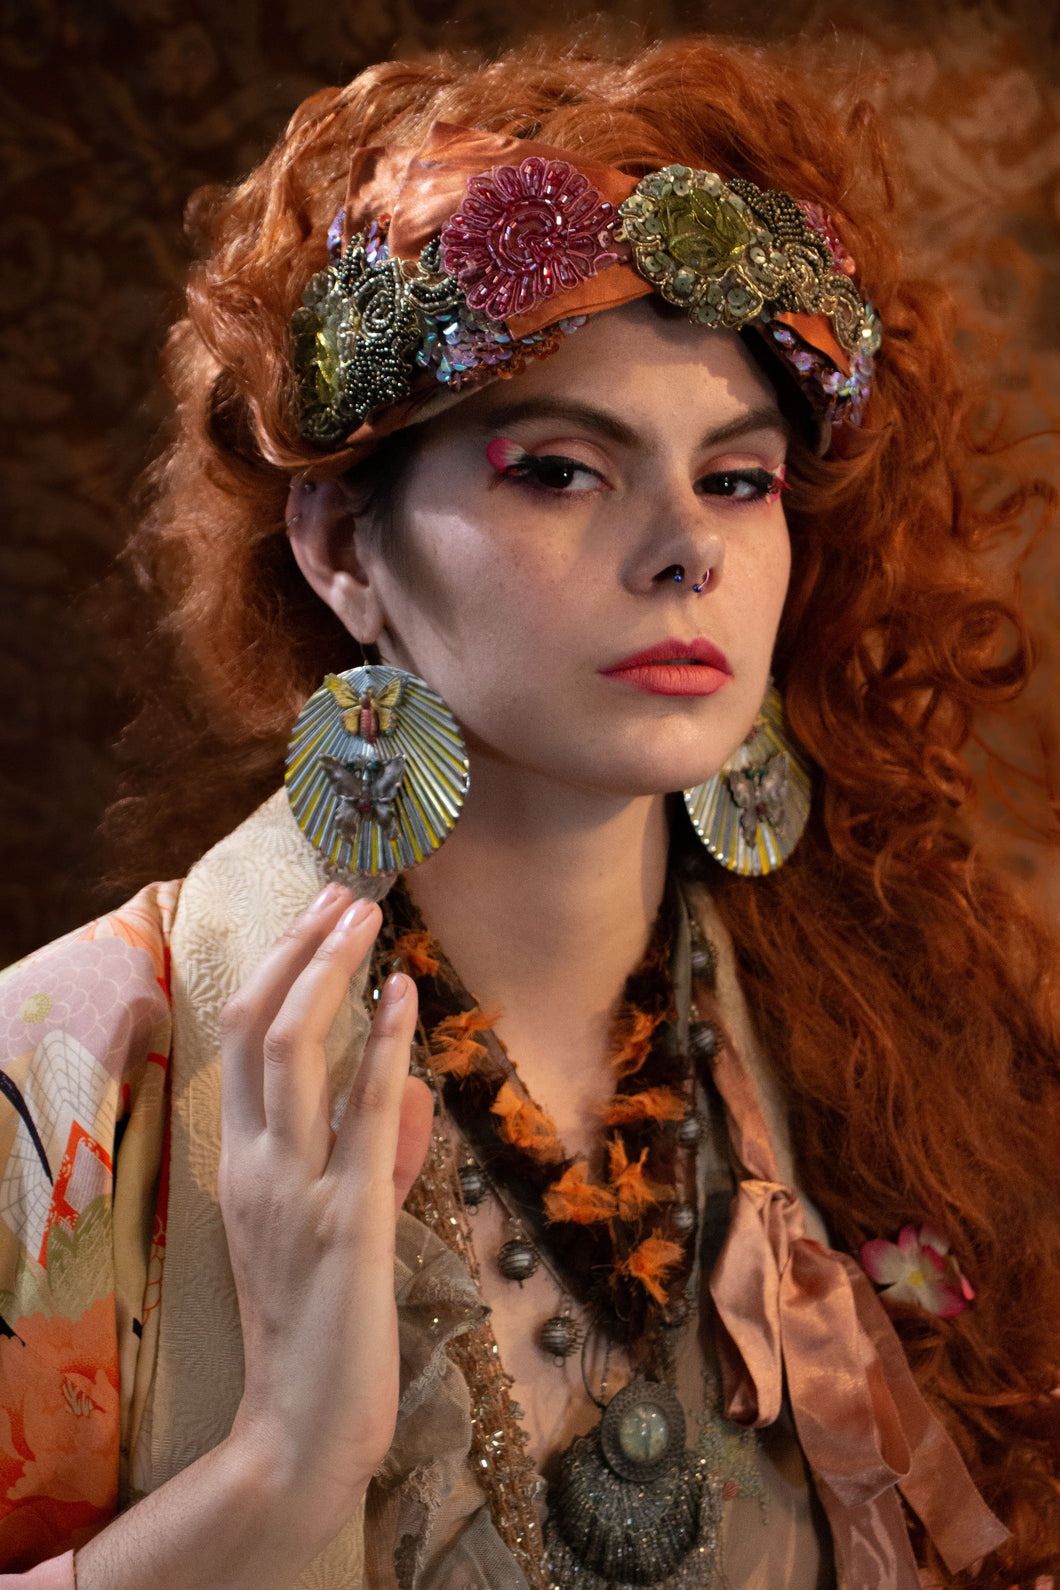 Created bespoke headband by Atelier Carpe Diem using up-cycled vintage beaded floral appliqués and a silk ribbon band.